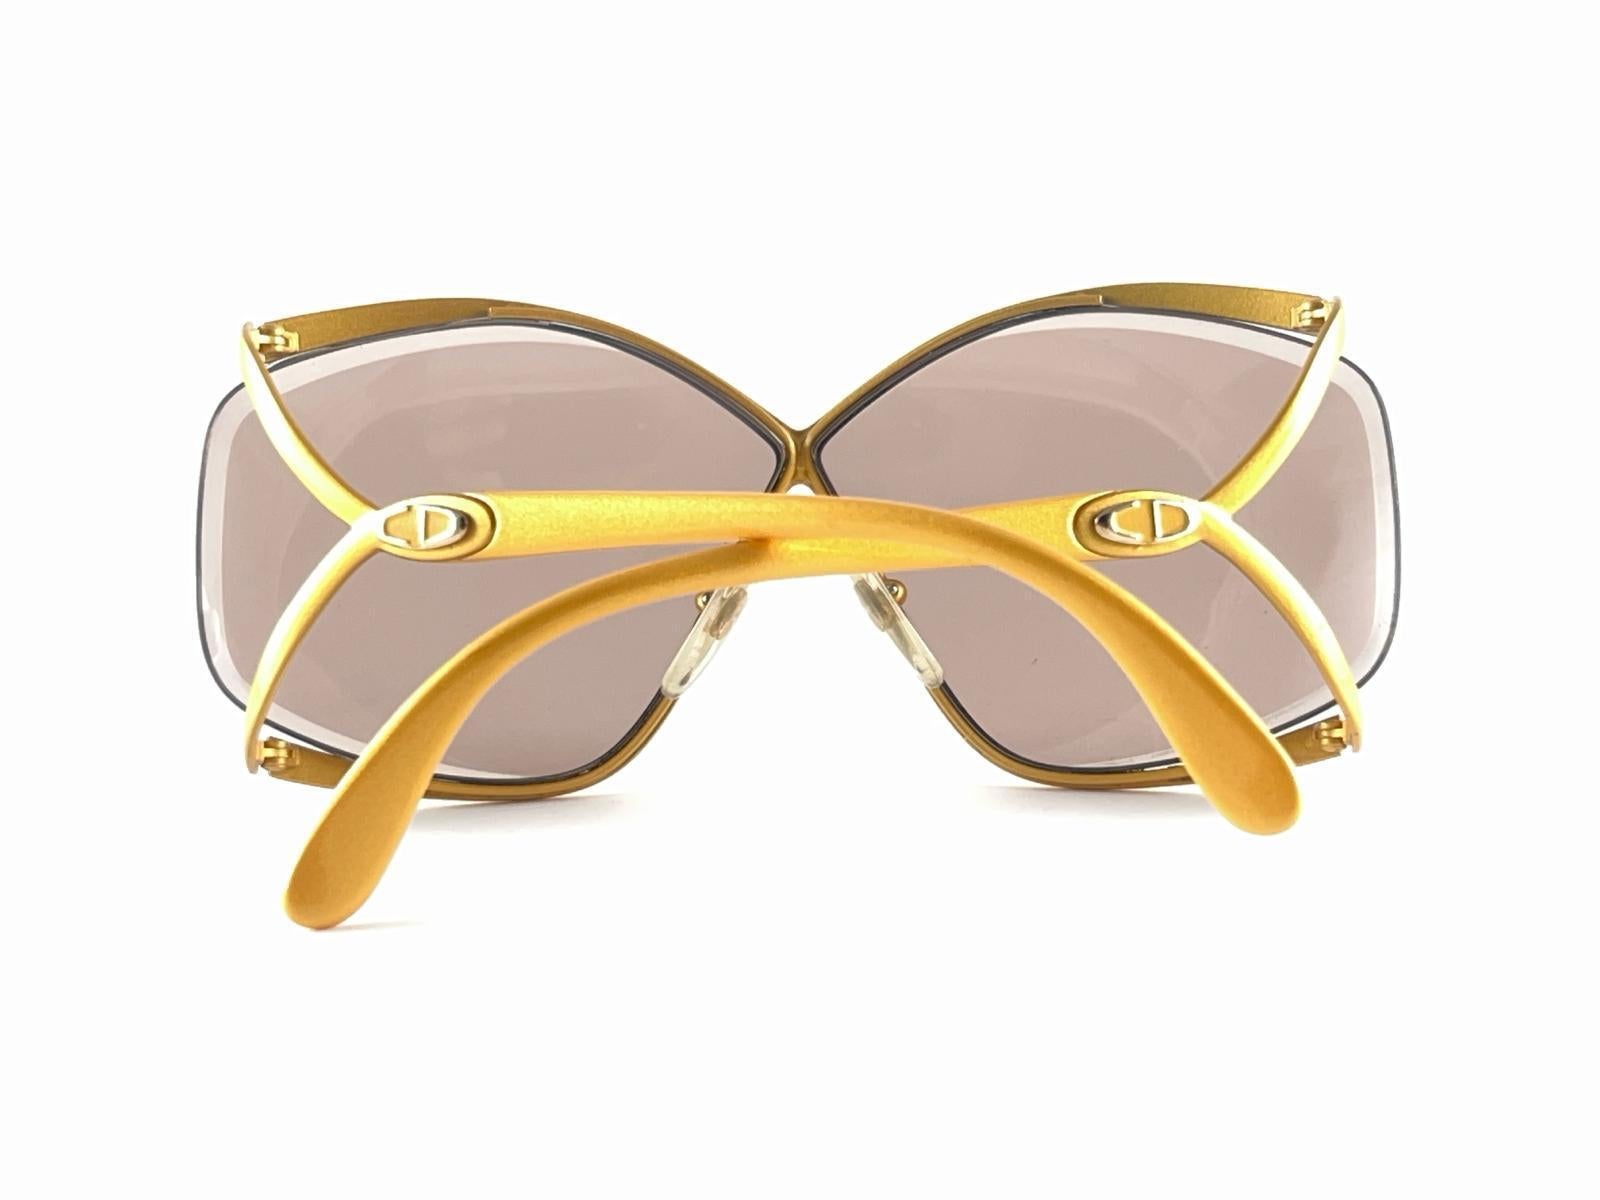 New Vintage Christian Dior 2056 40 Butterfly Mustard Sunglasses Made in Germany For Sale 8